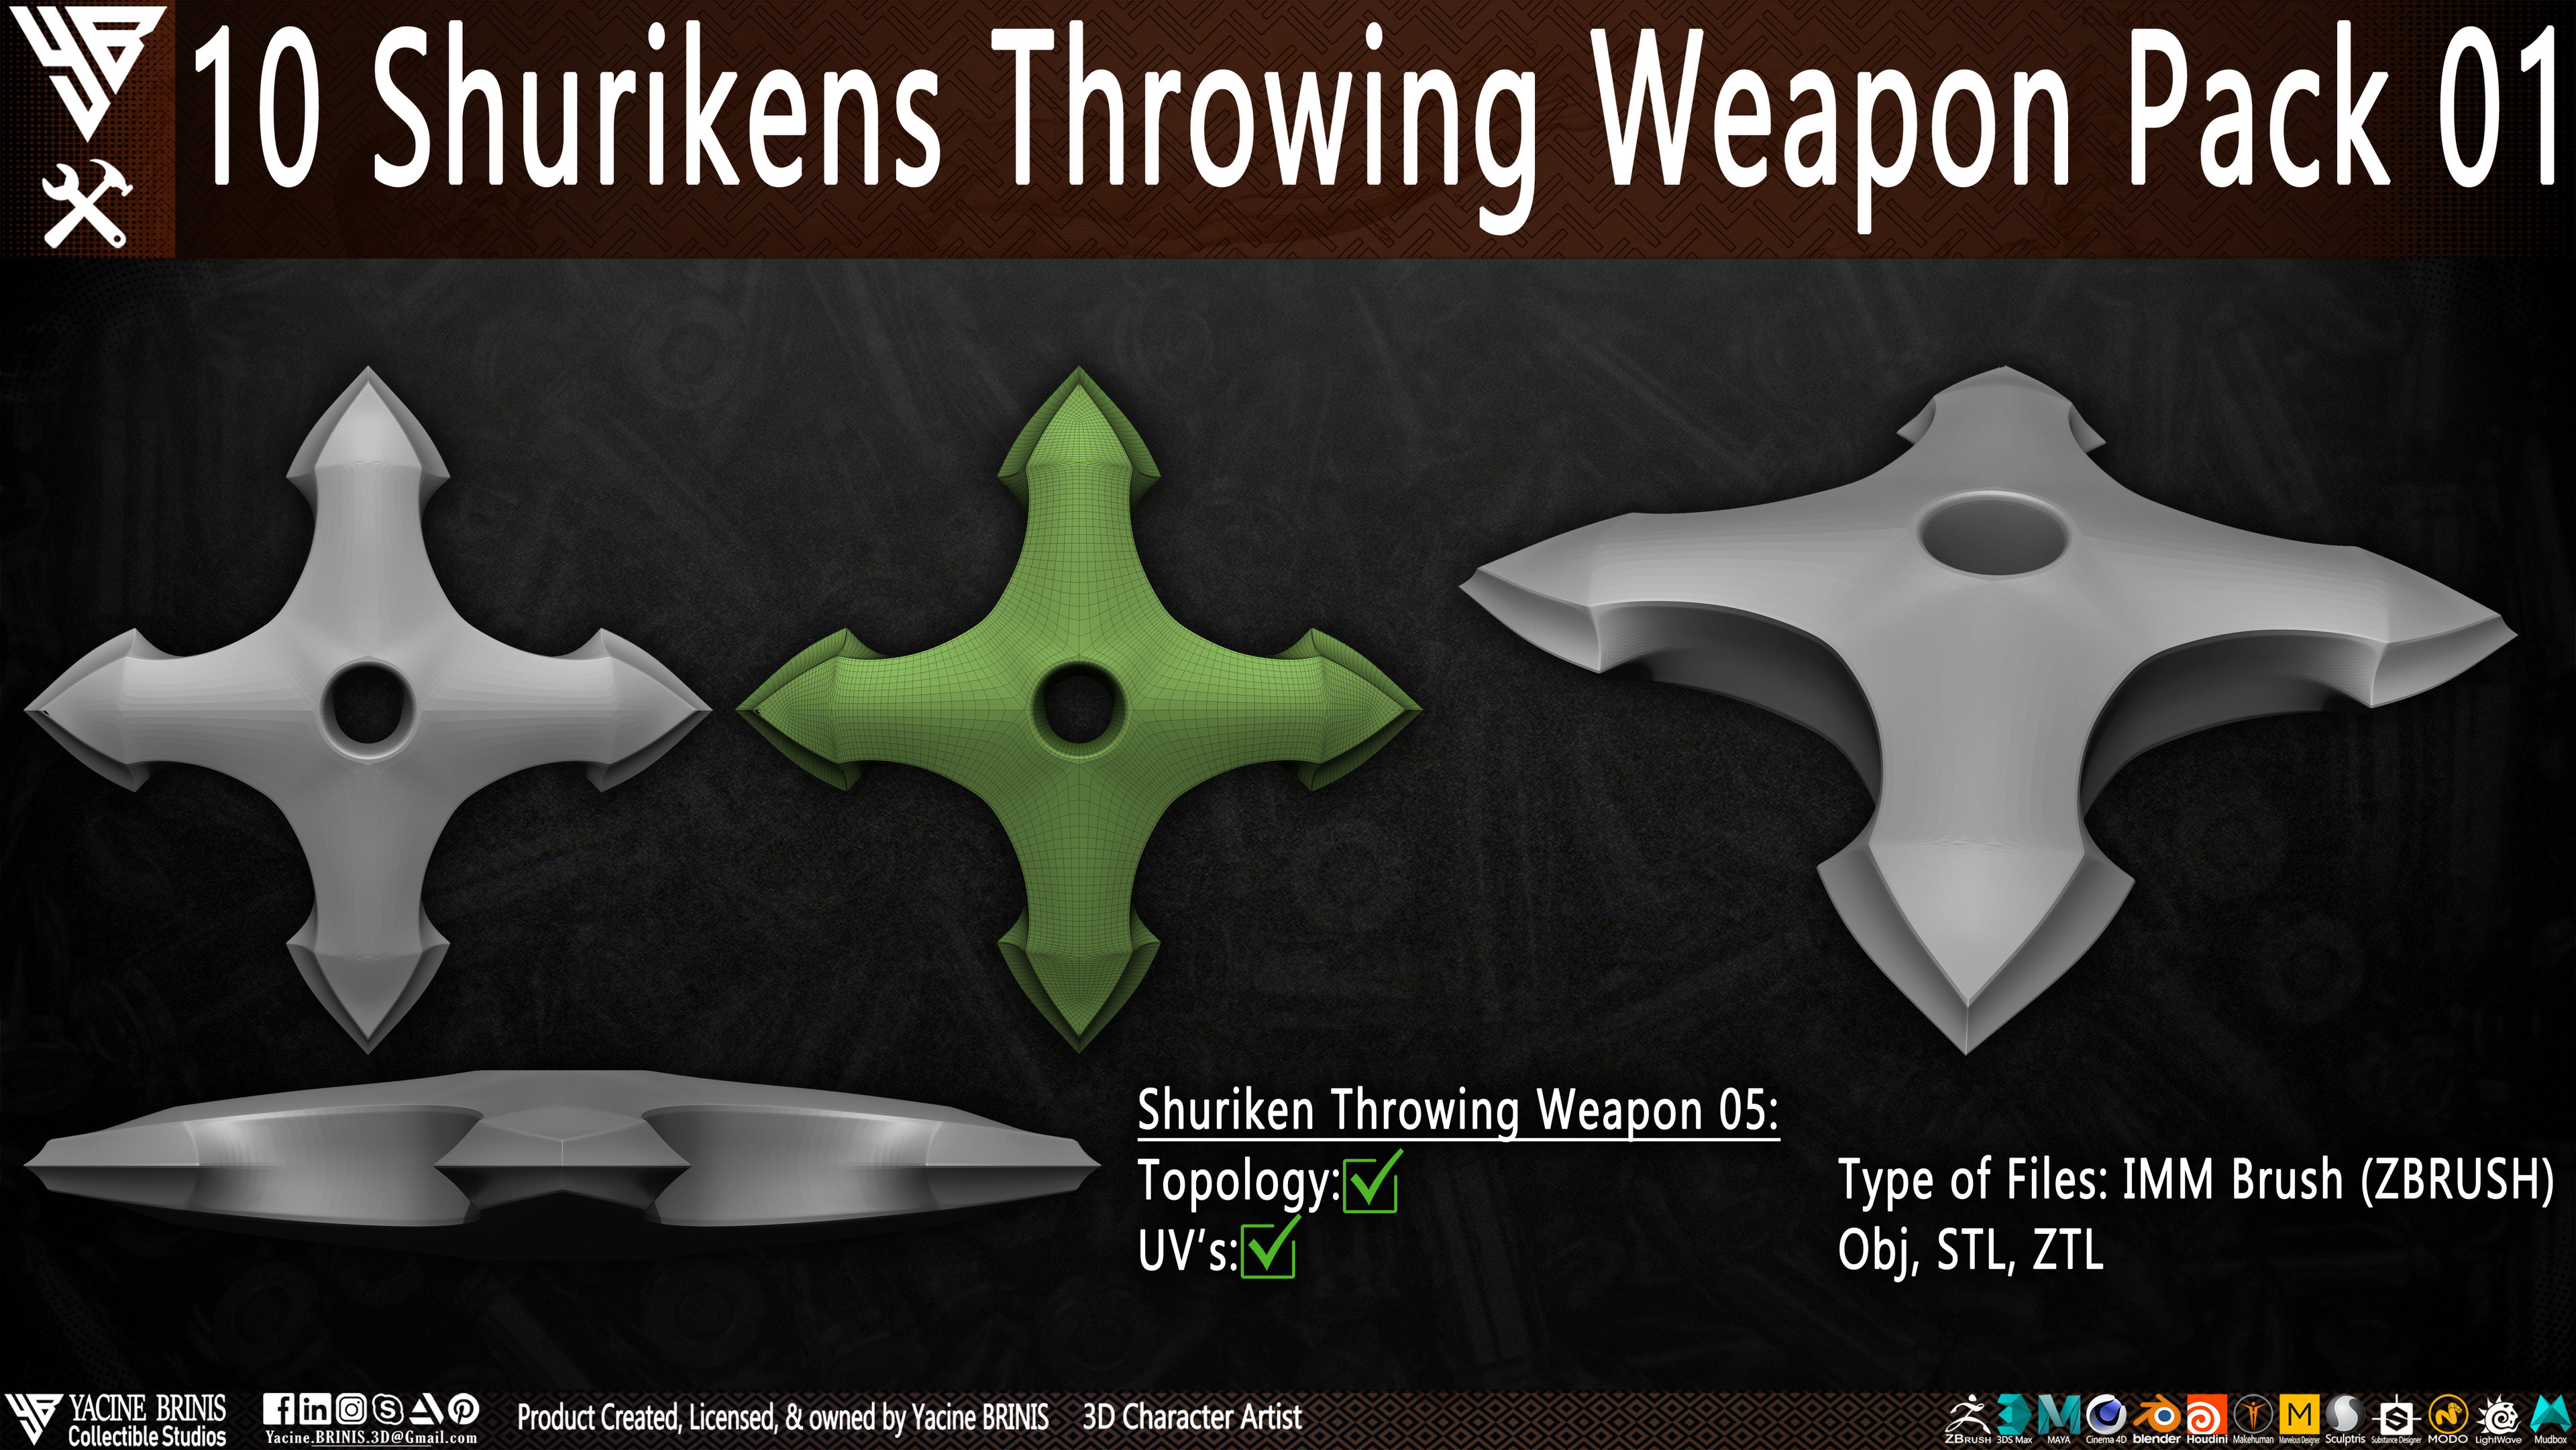 10 Shurikens Throwing Weapon Pack 01 sculpted by Yacine BRINIS Set 09